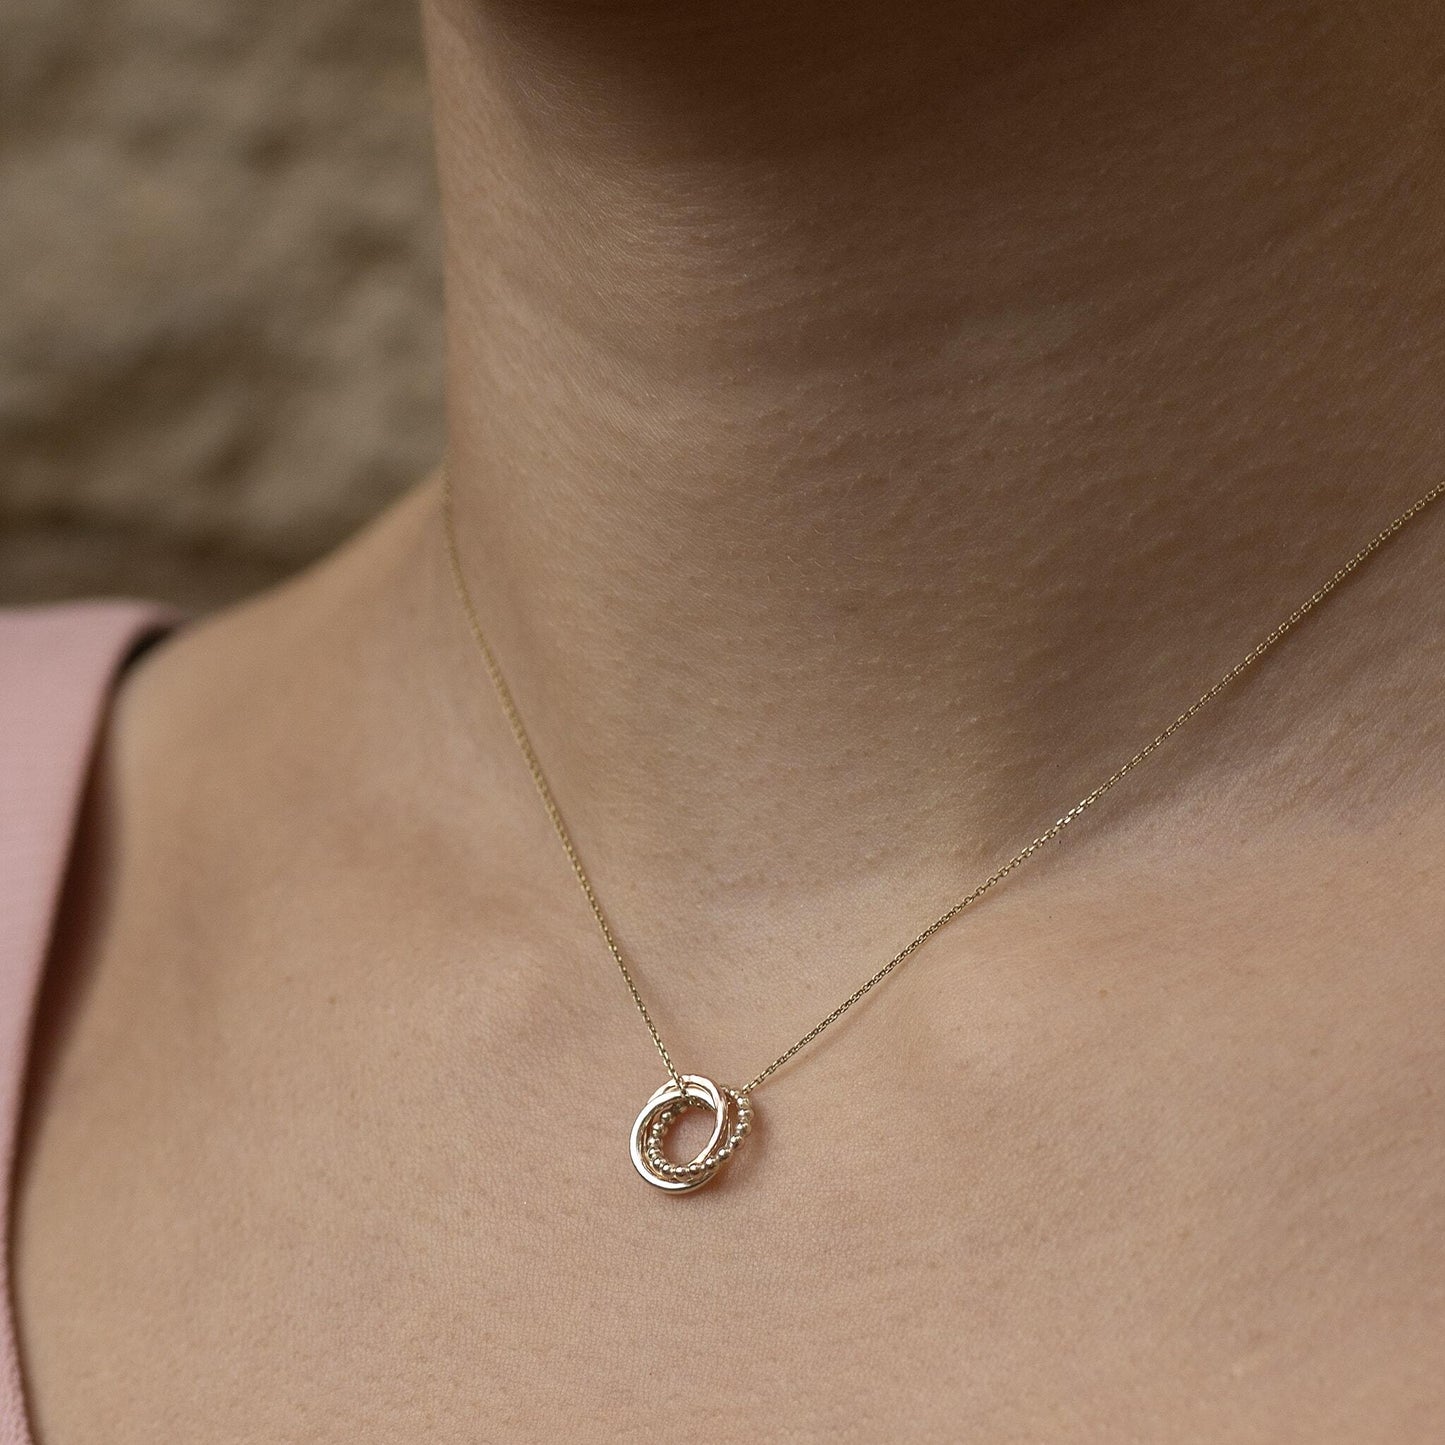 Tiny 9kt Gold Love Knot Necklace - 3 Links for 3 Loved Ones - Recycled White Gold - Rose Gold - Yellow Gold